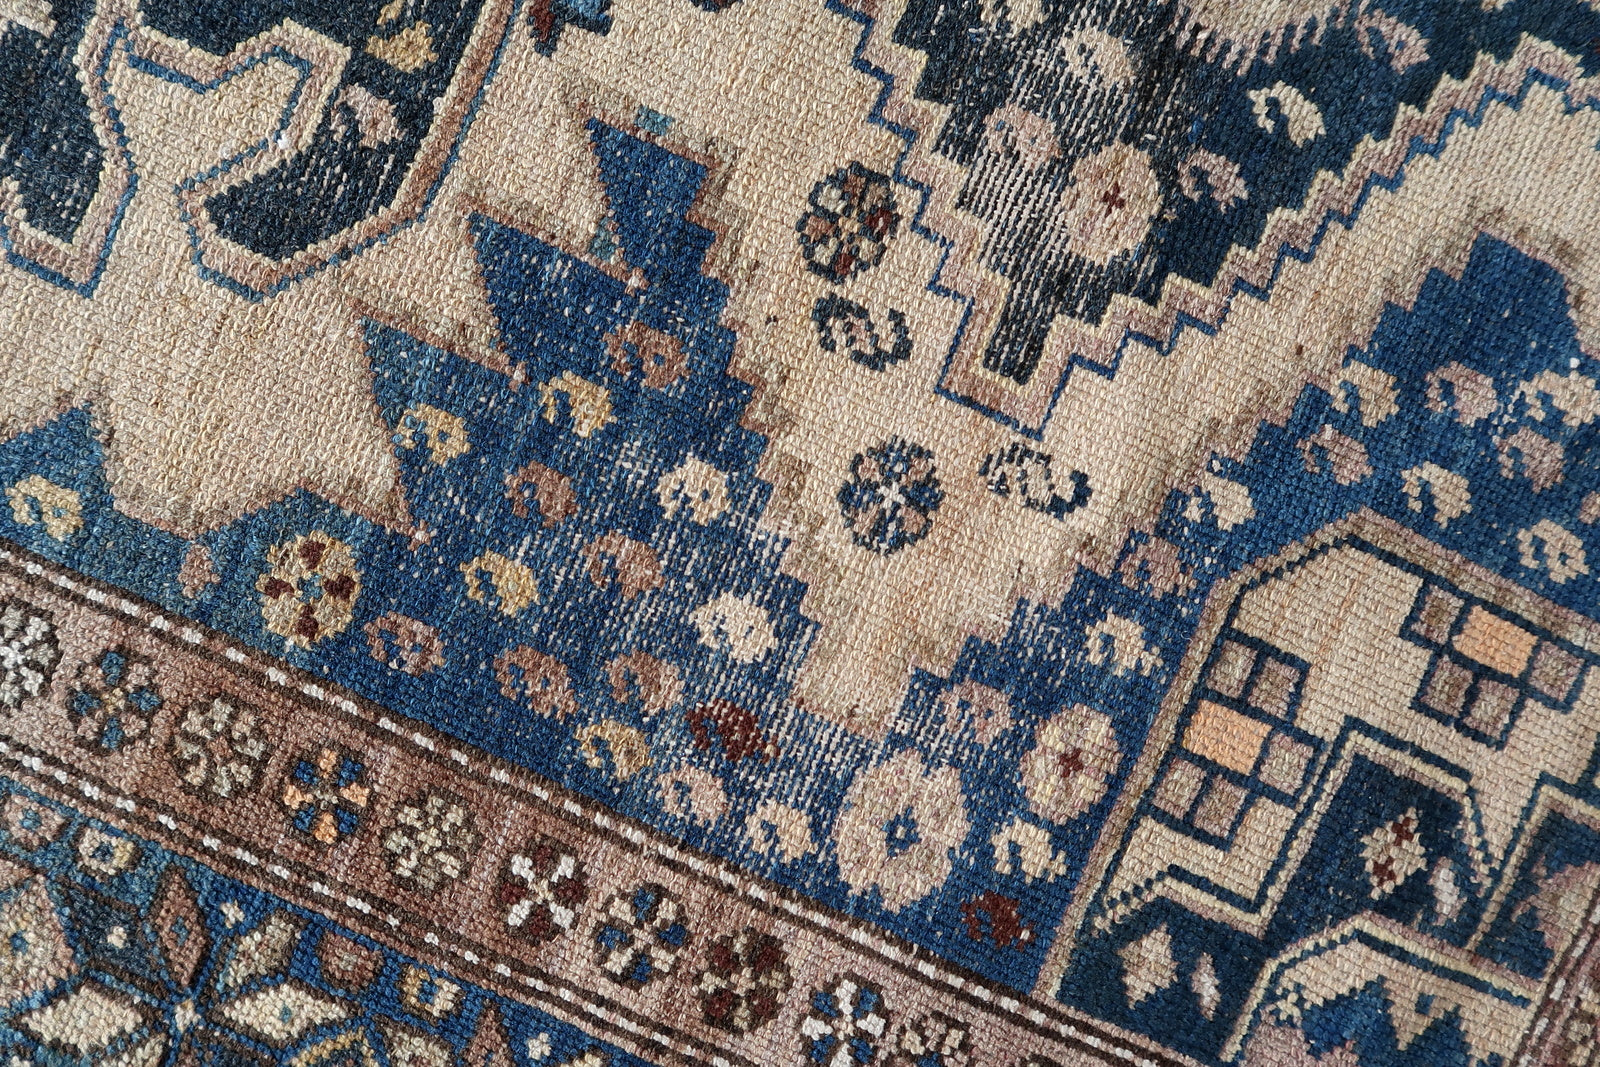 Close-up of versatile placement on Handmade Antique Caucasian Shirvan Rug - Detailed view demonstrating the rug's versatility in various settings.